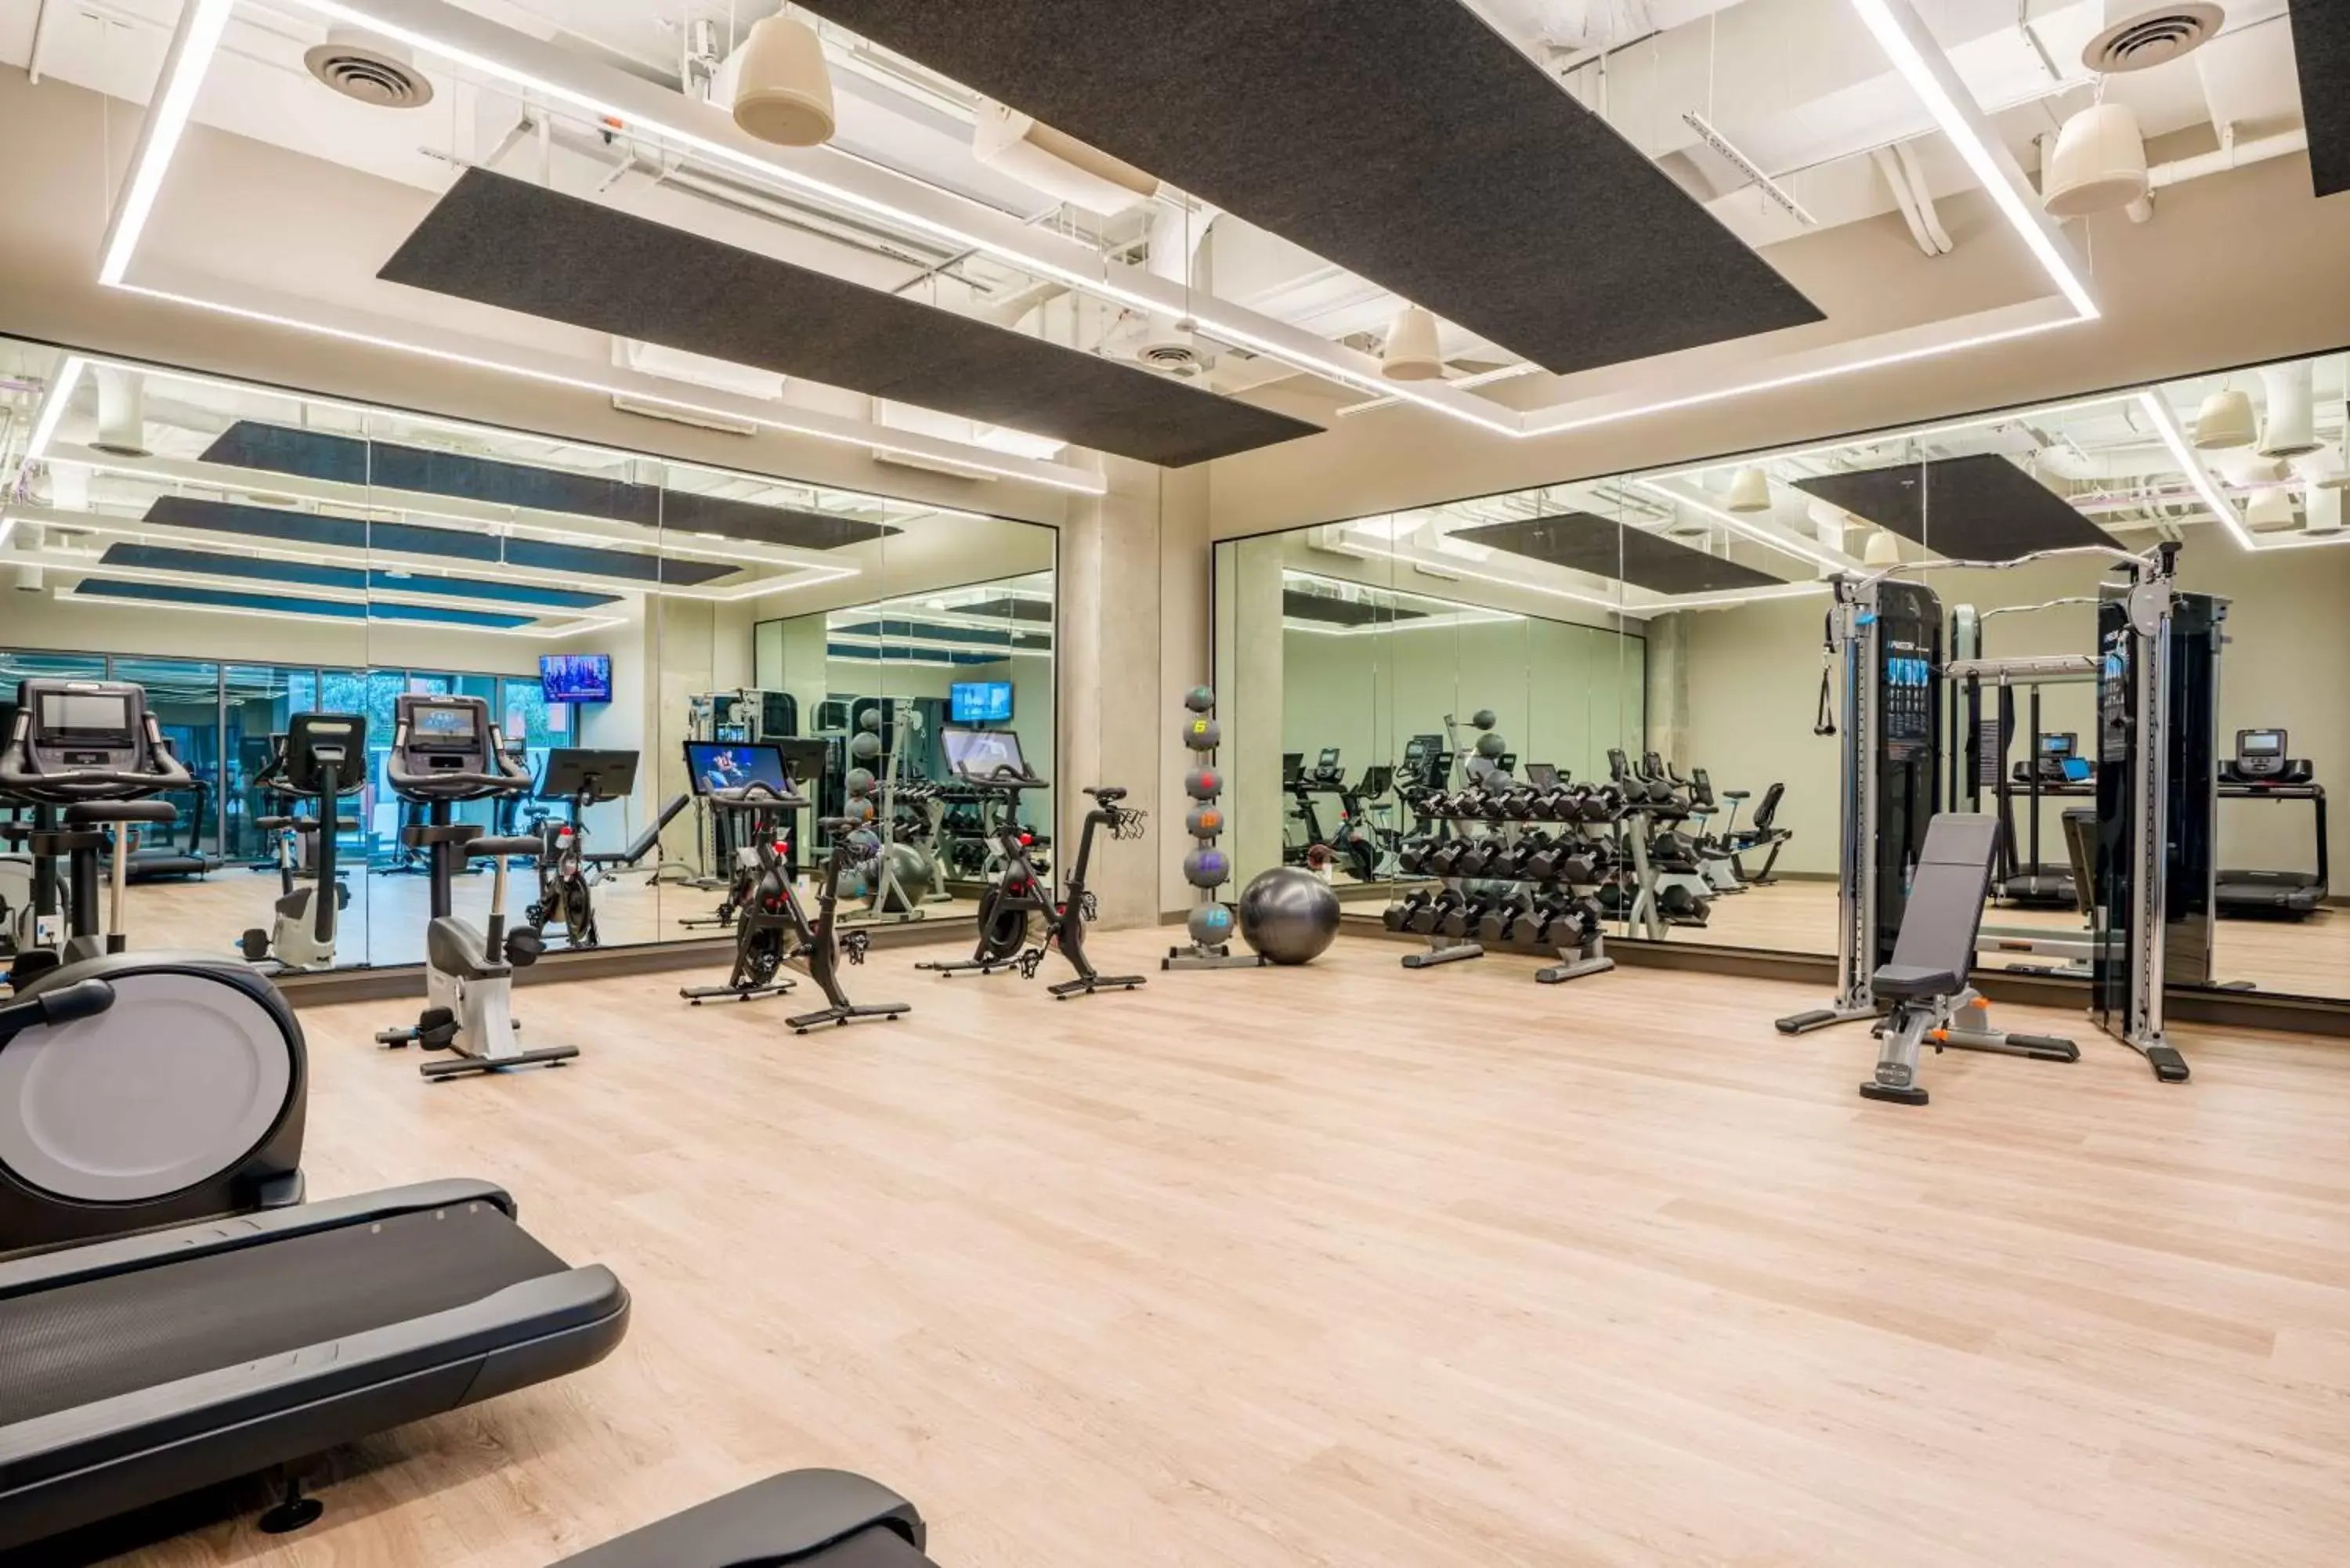 Fitness centre/facilities, Fitness Center/Facilities in Shashi Hotel Mountain View, an Urban Resort